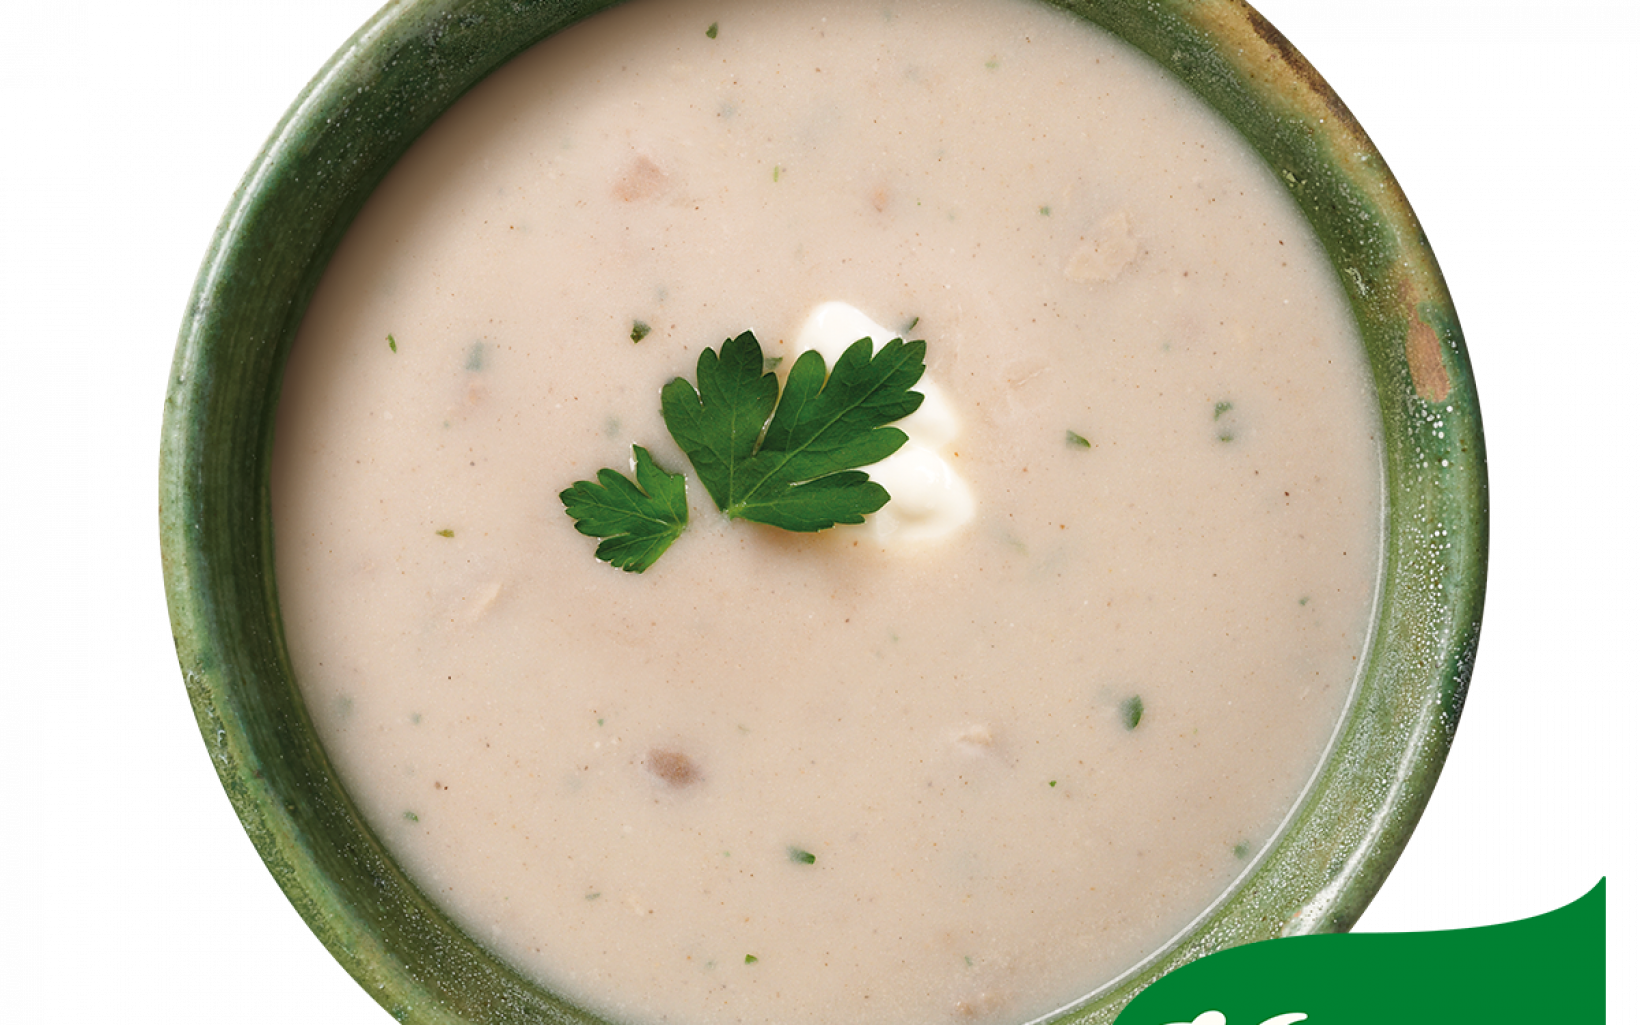 49326 Uk Knorr Classic Cream Of Mushroom Soup With Logo Supp Image 1200x1200px 20203pm